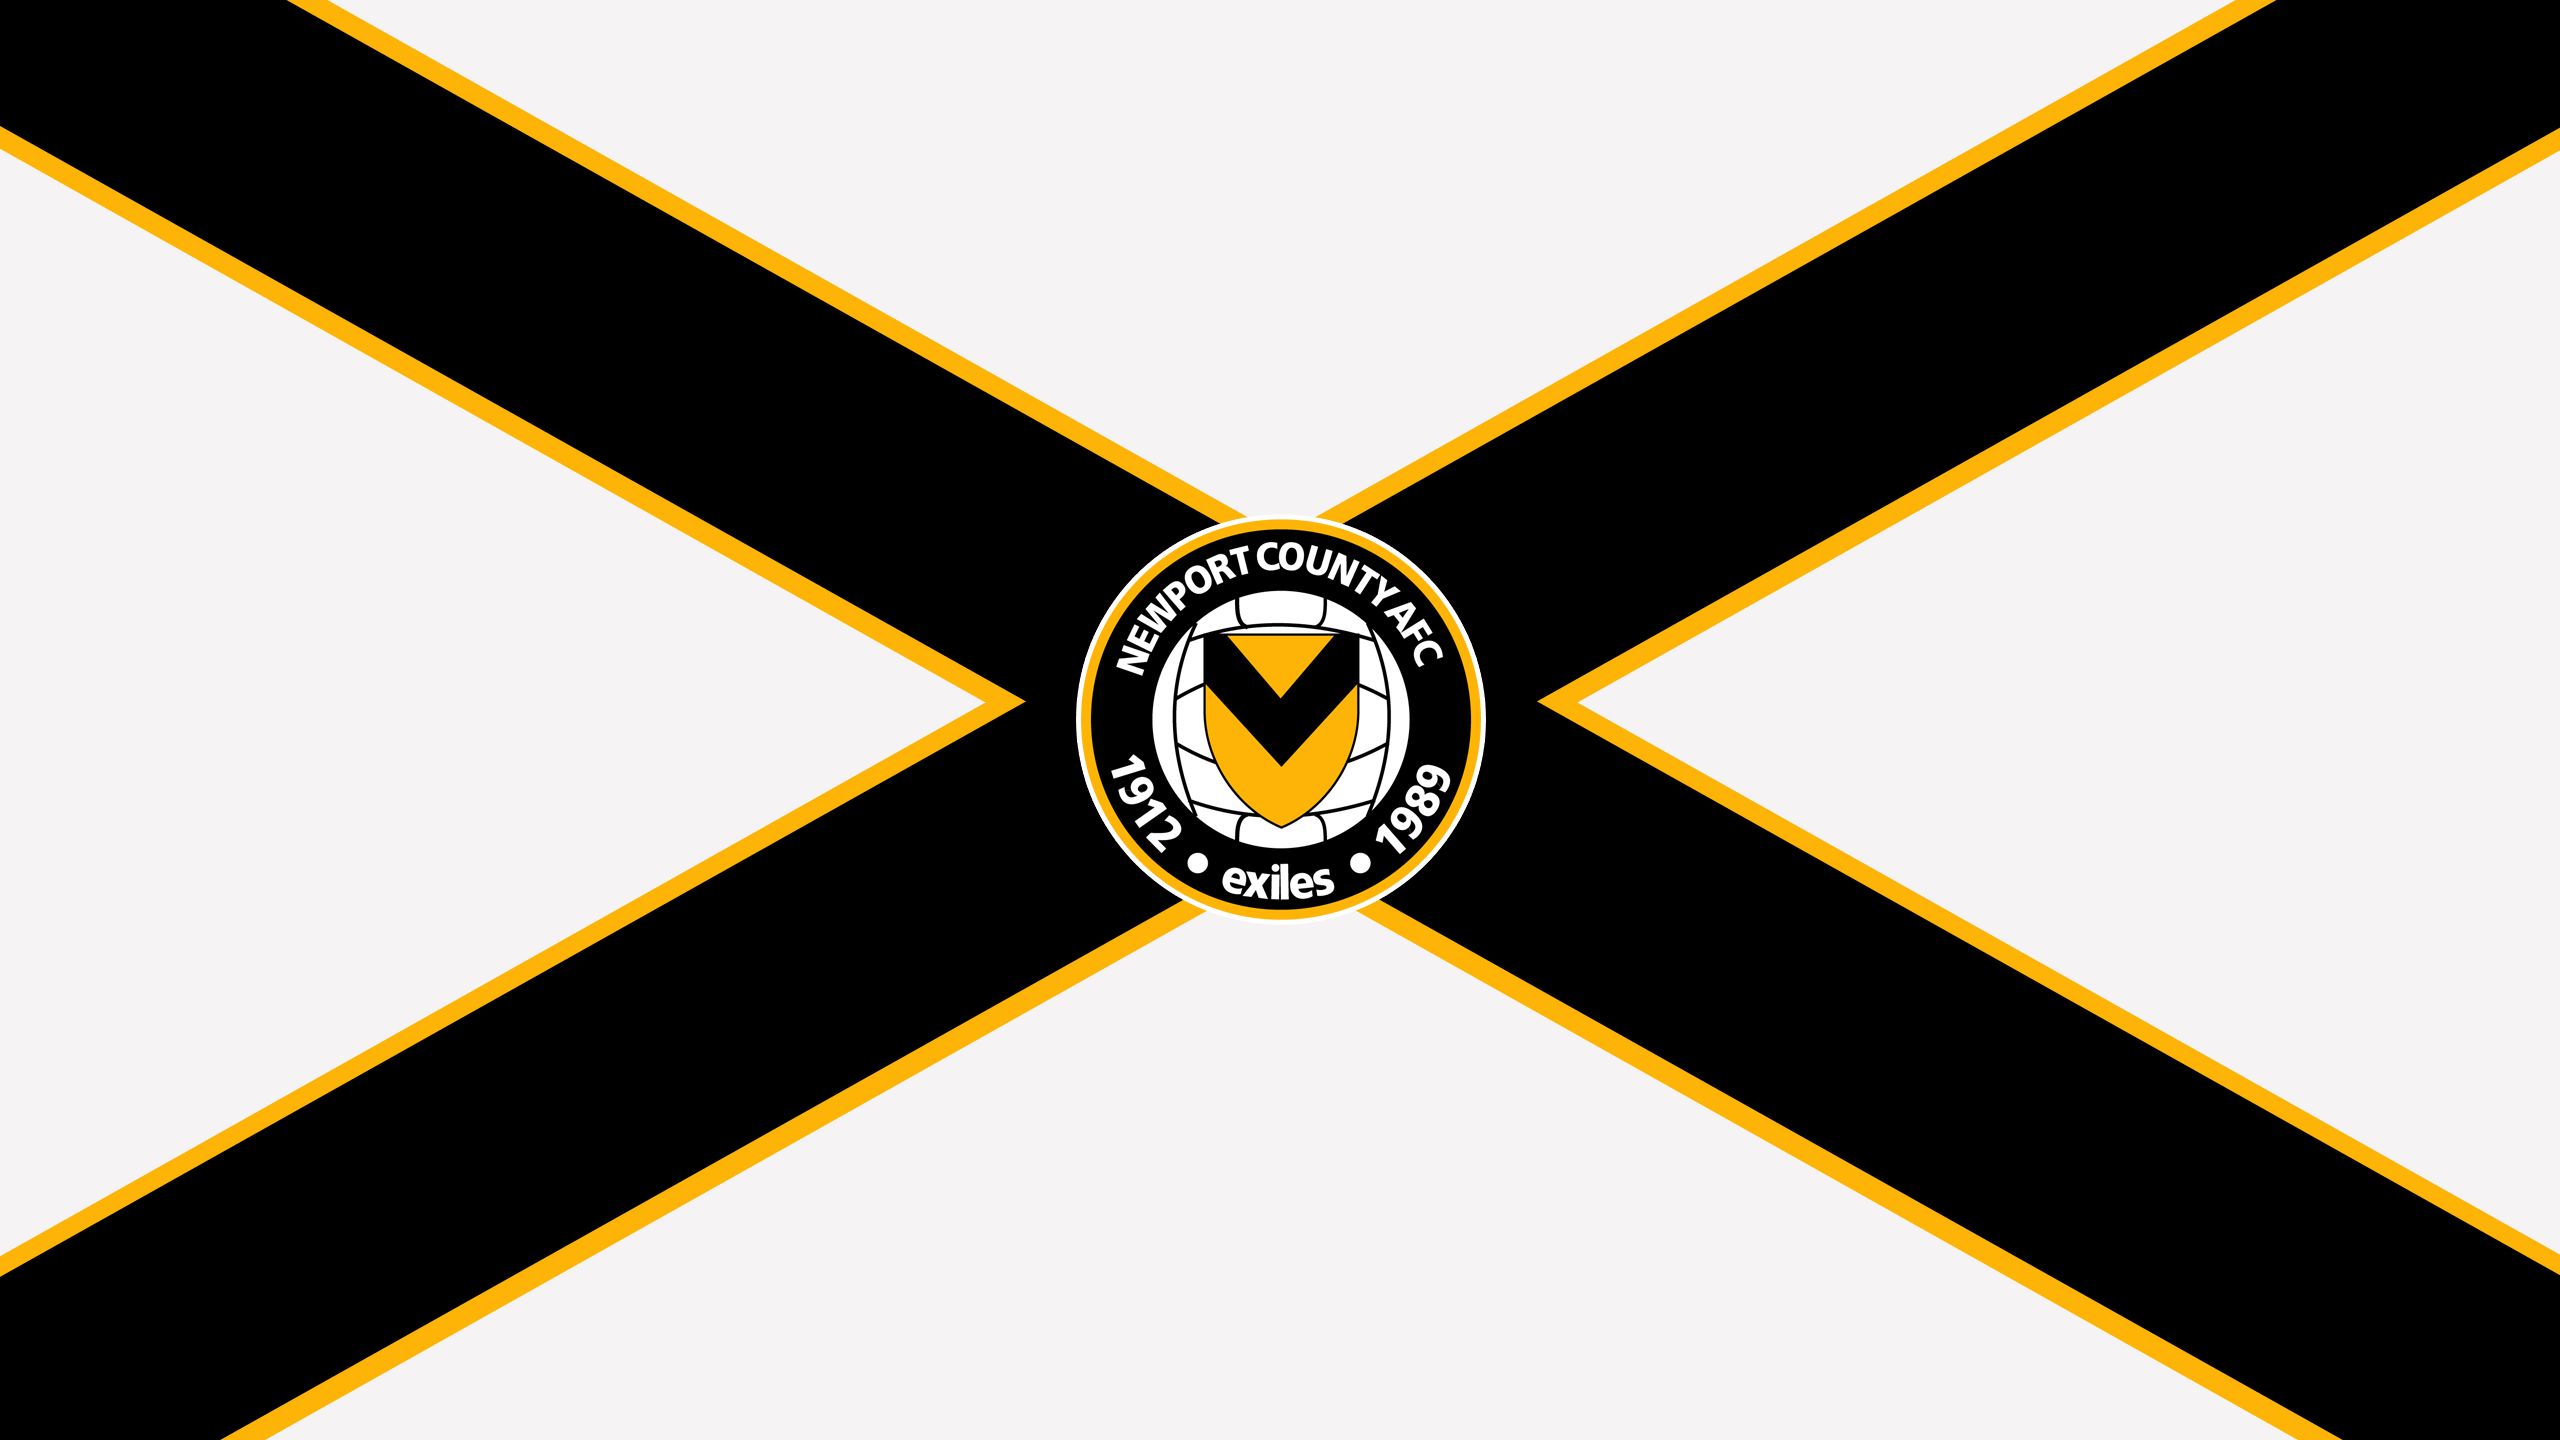 Cool Newport County A F C Backgrounds